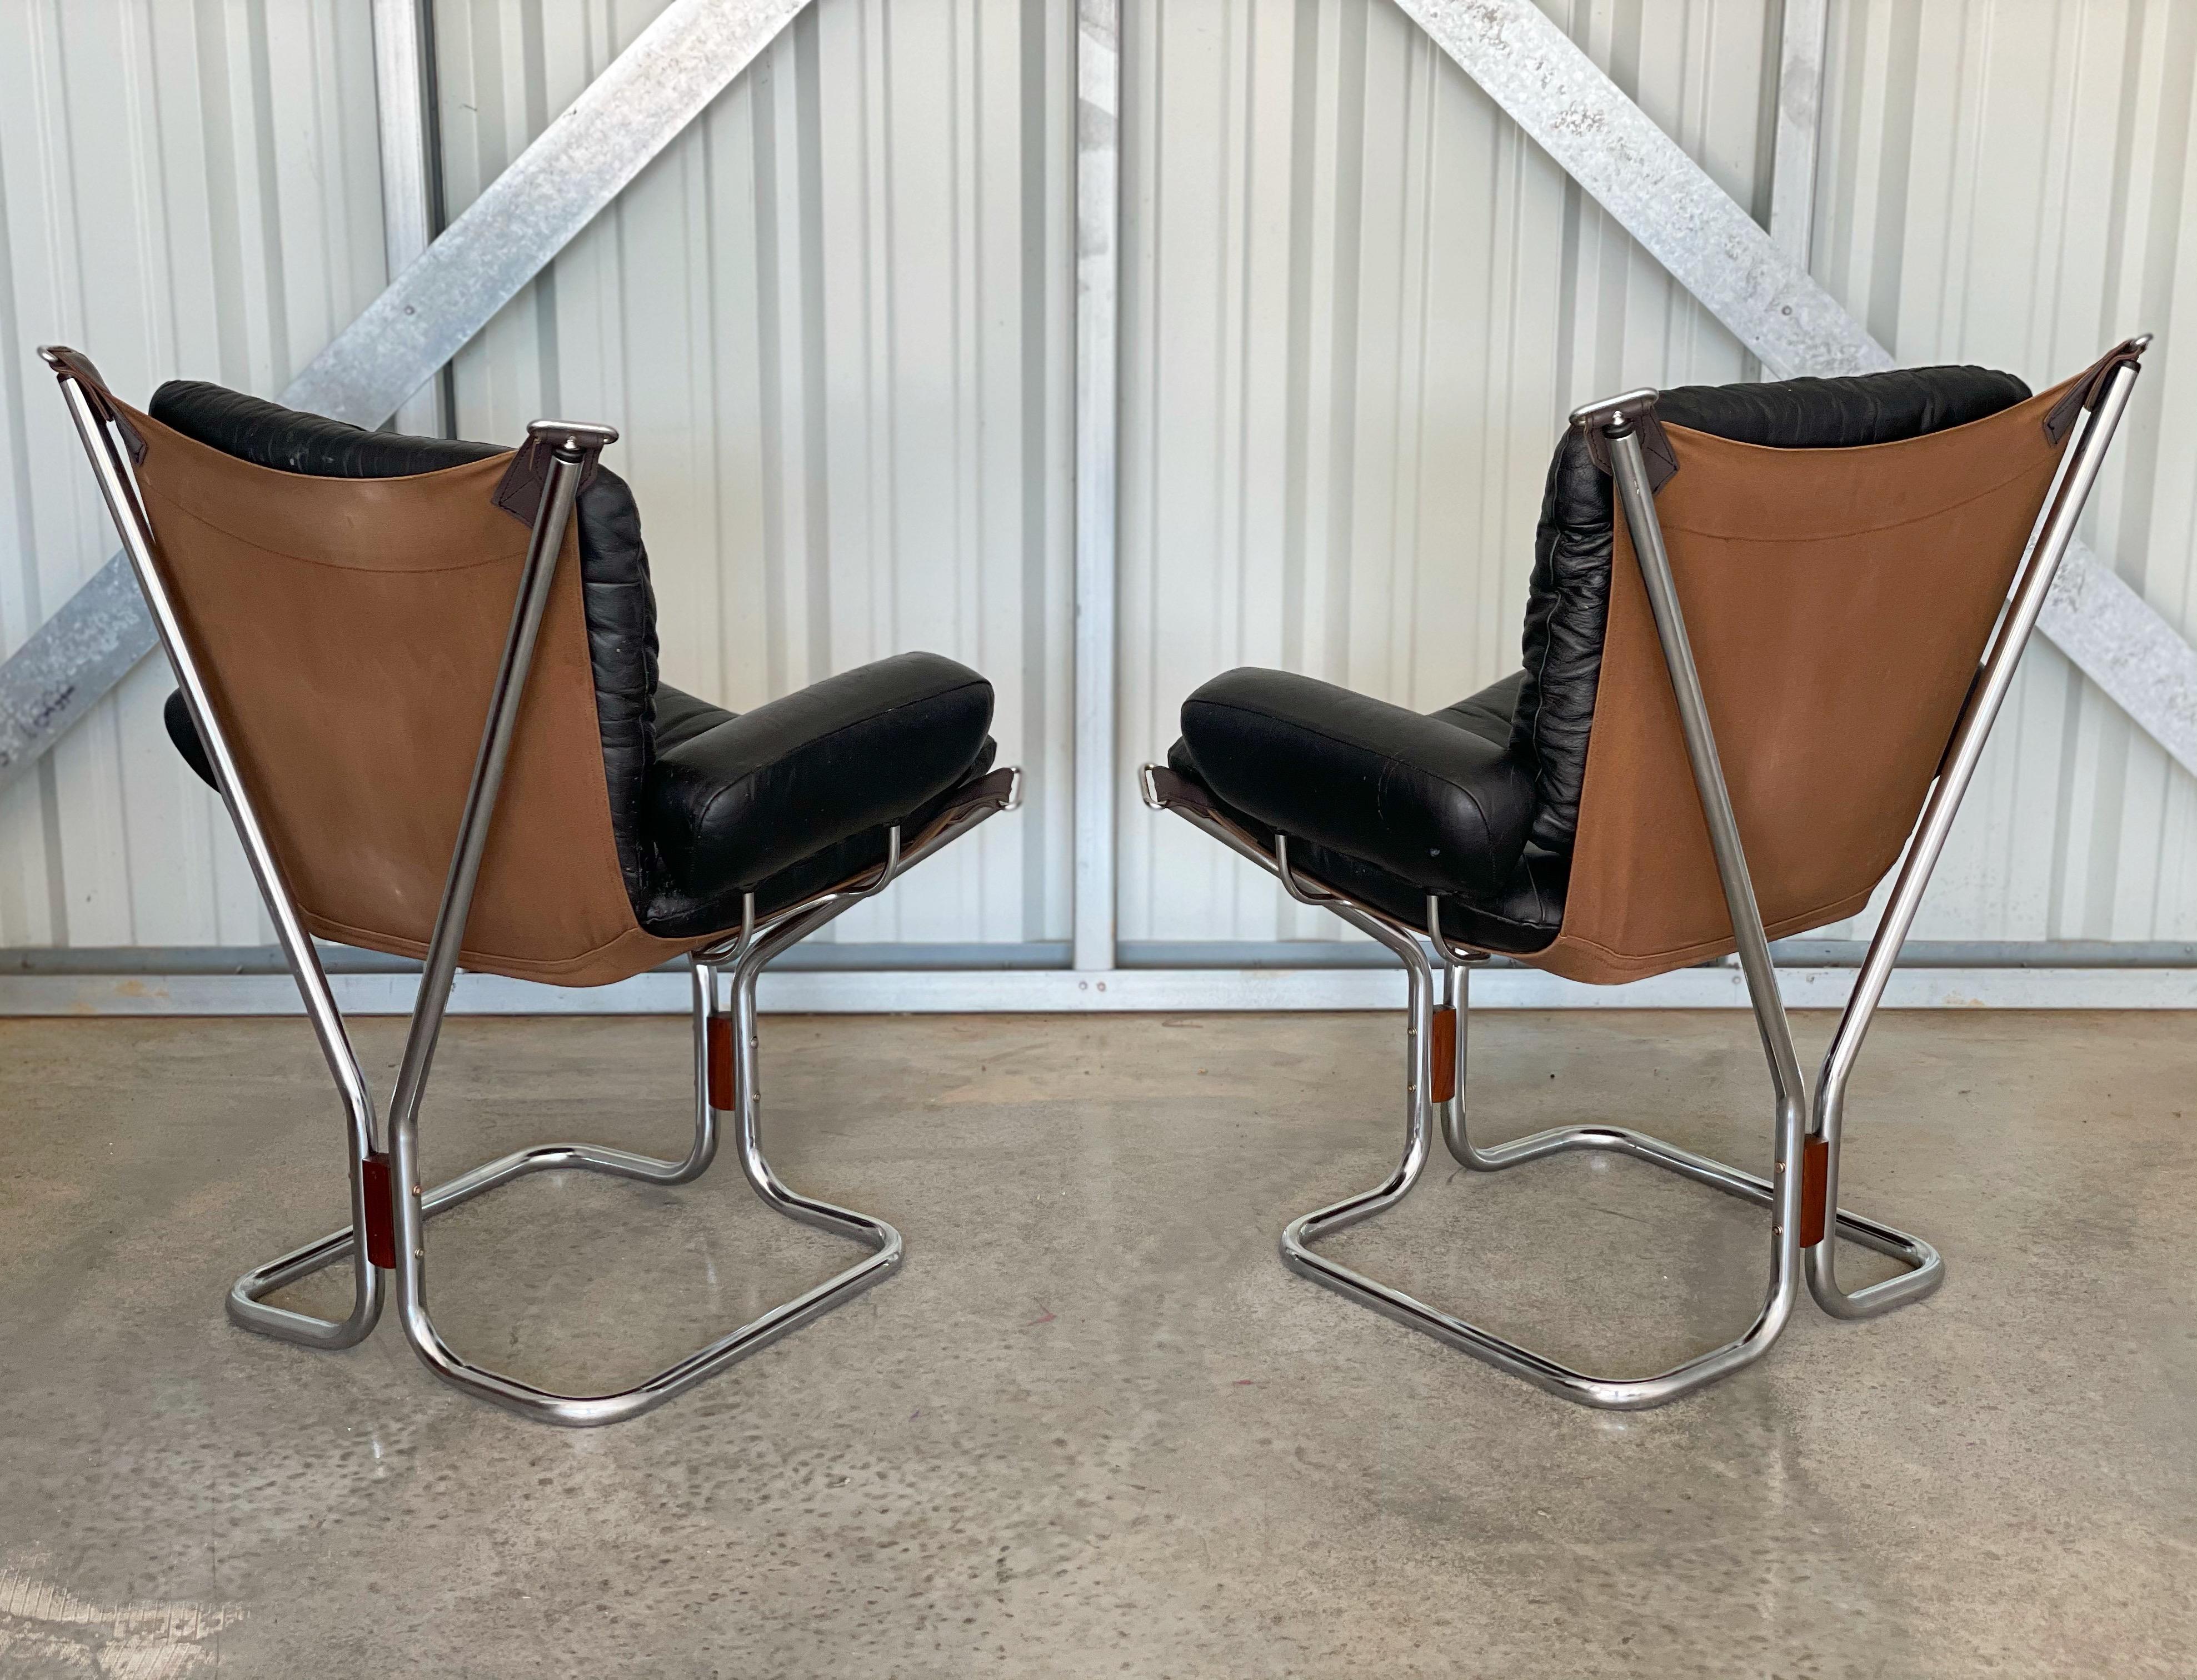 Late 20th Century Pair of Midcentury Chairs Black Leather and Chrome, Ingmar Relling for Westnofa